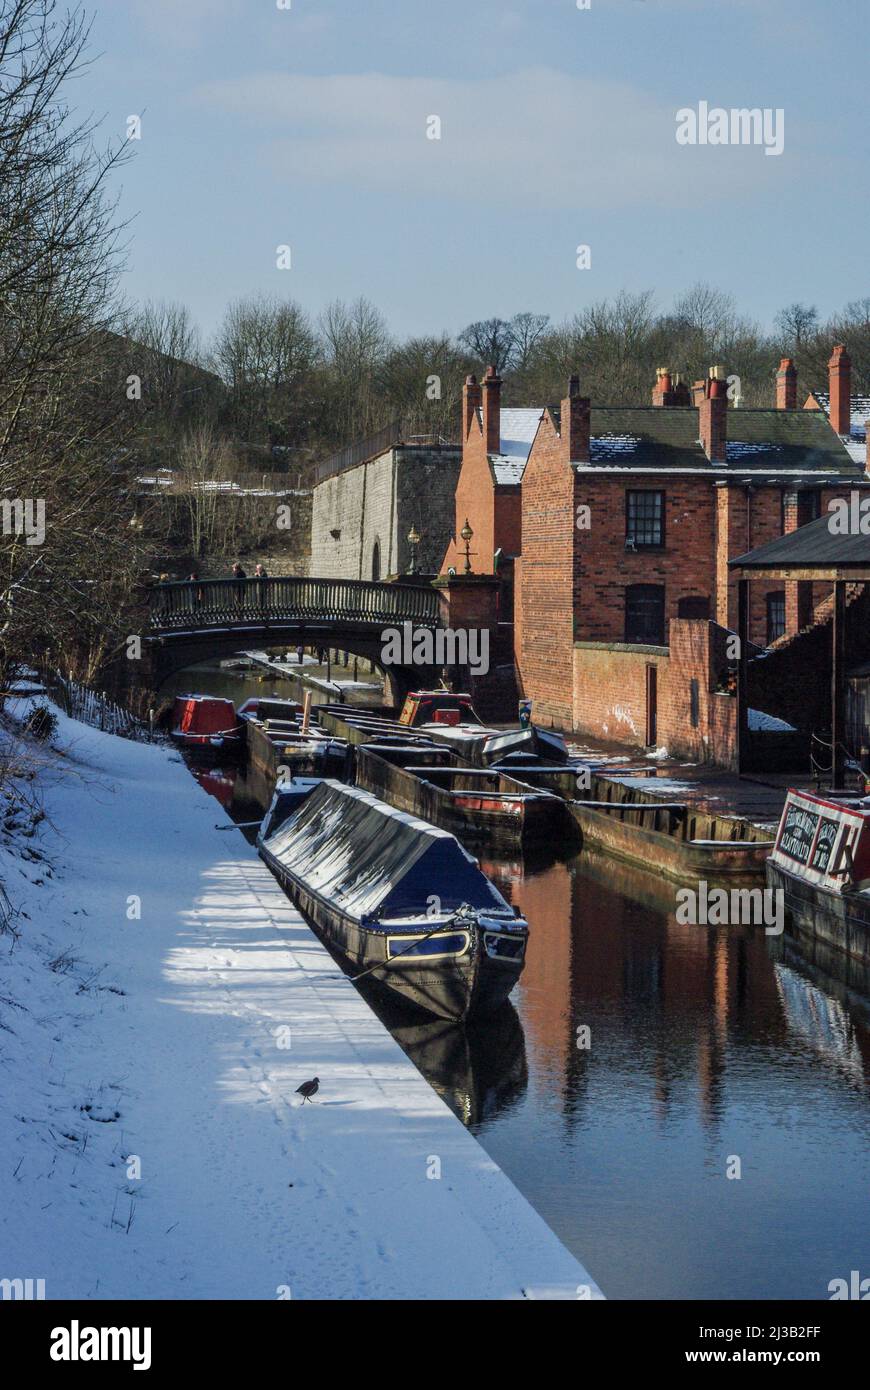 Snowy winter scene with narrowboats on the canal, Black Country Living Museum, Dudley, West Midlands, UK Stock Photo